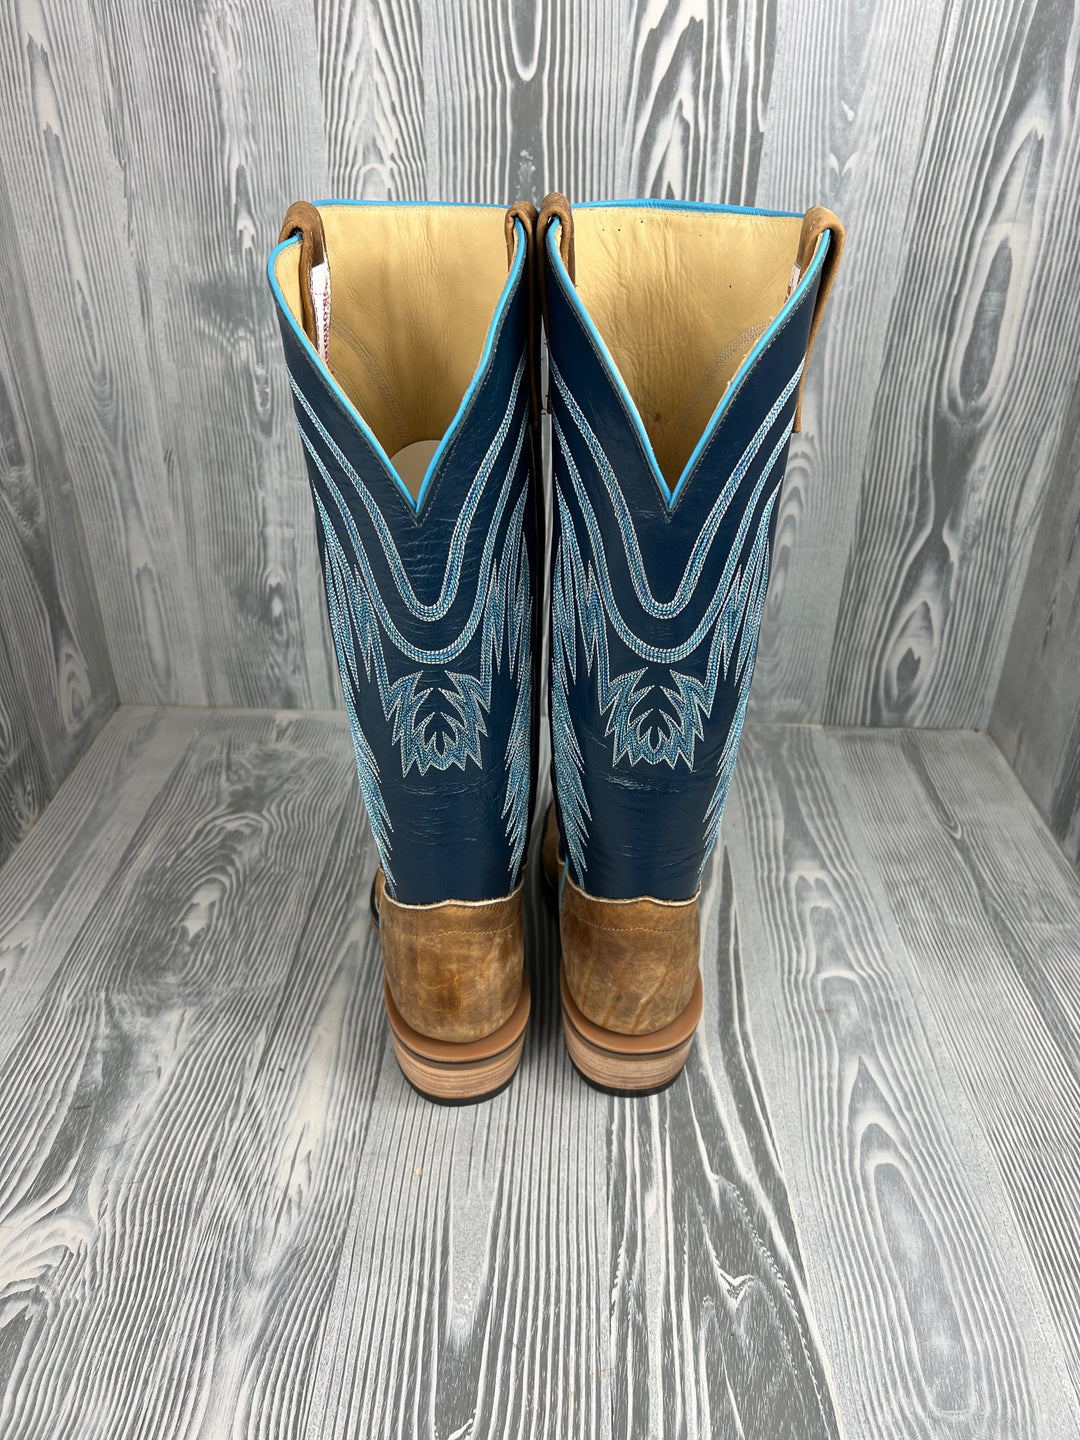 Men's Olathe Distressed American Bison with 15" Blue Glazed Buffalo Tops